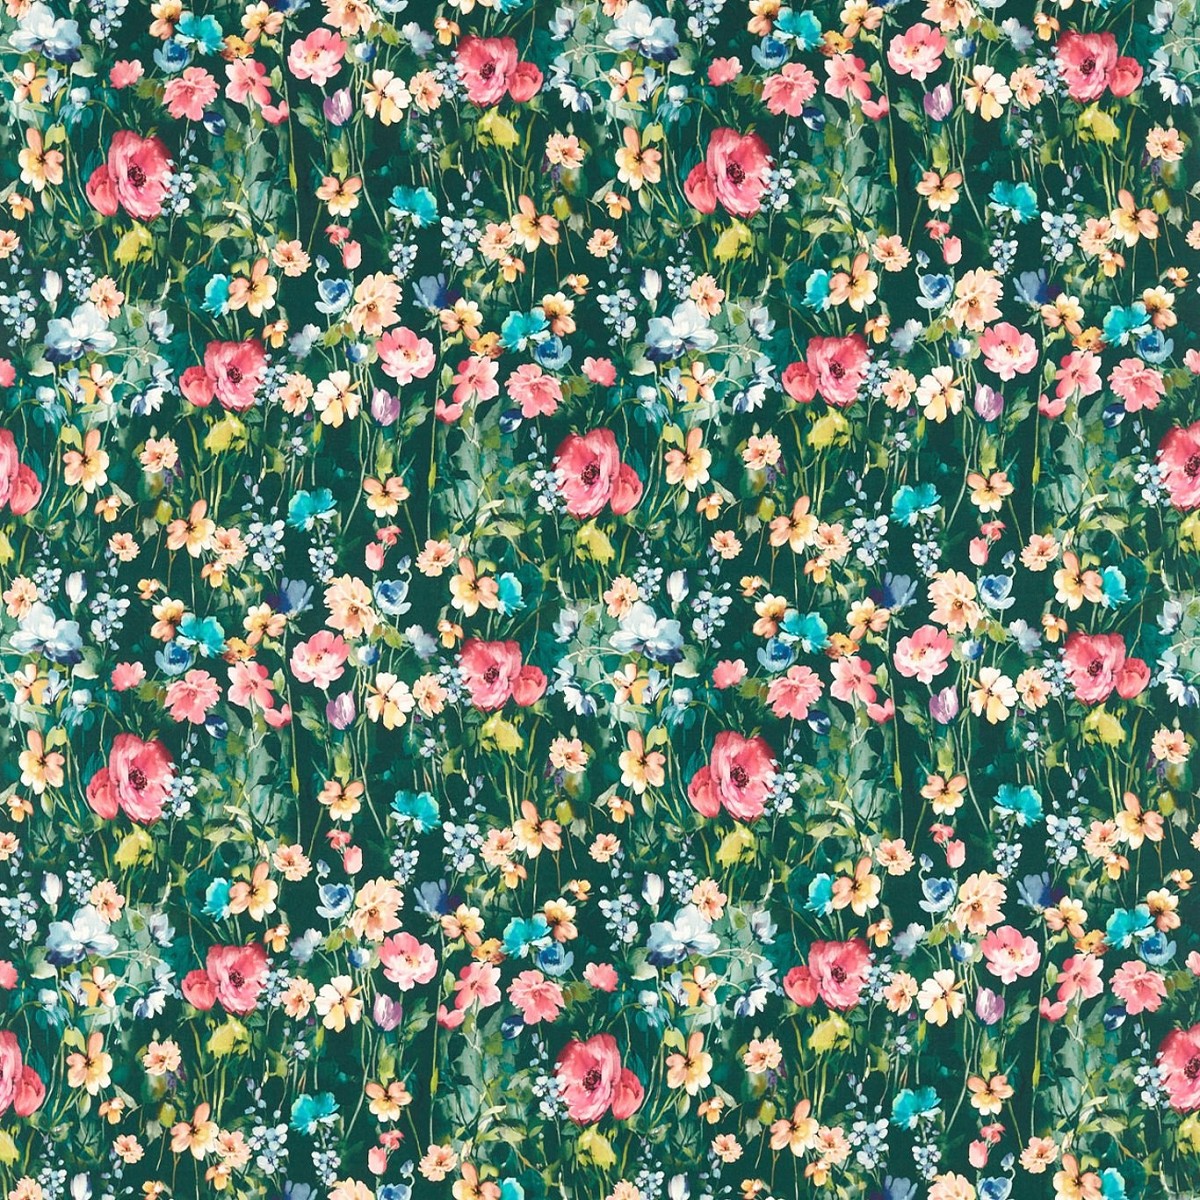 Wild Meadow Forest Fabric by Studio G